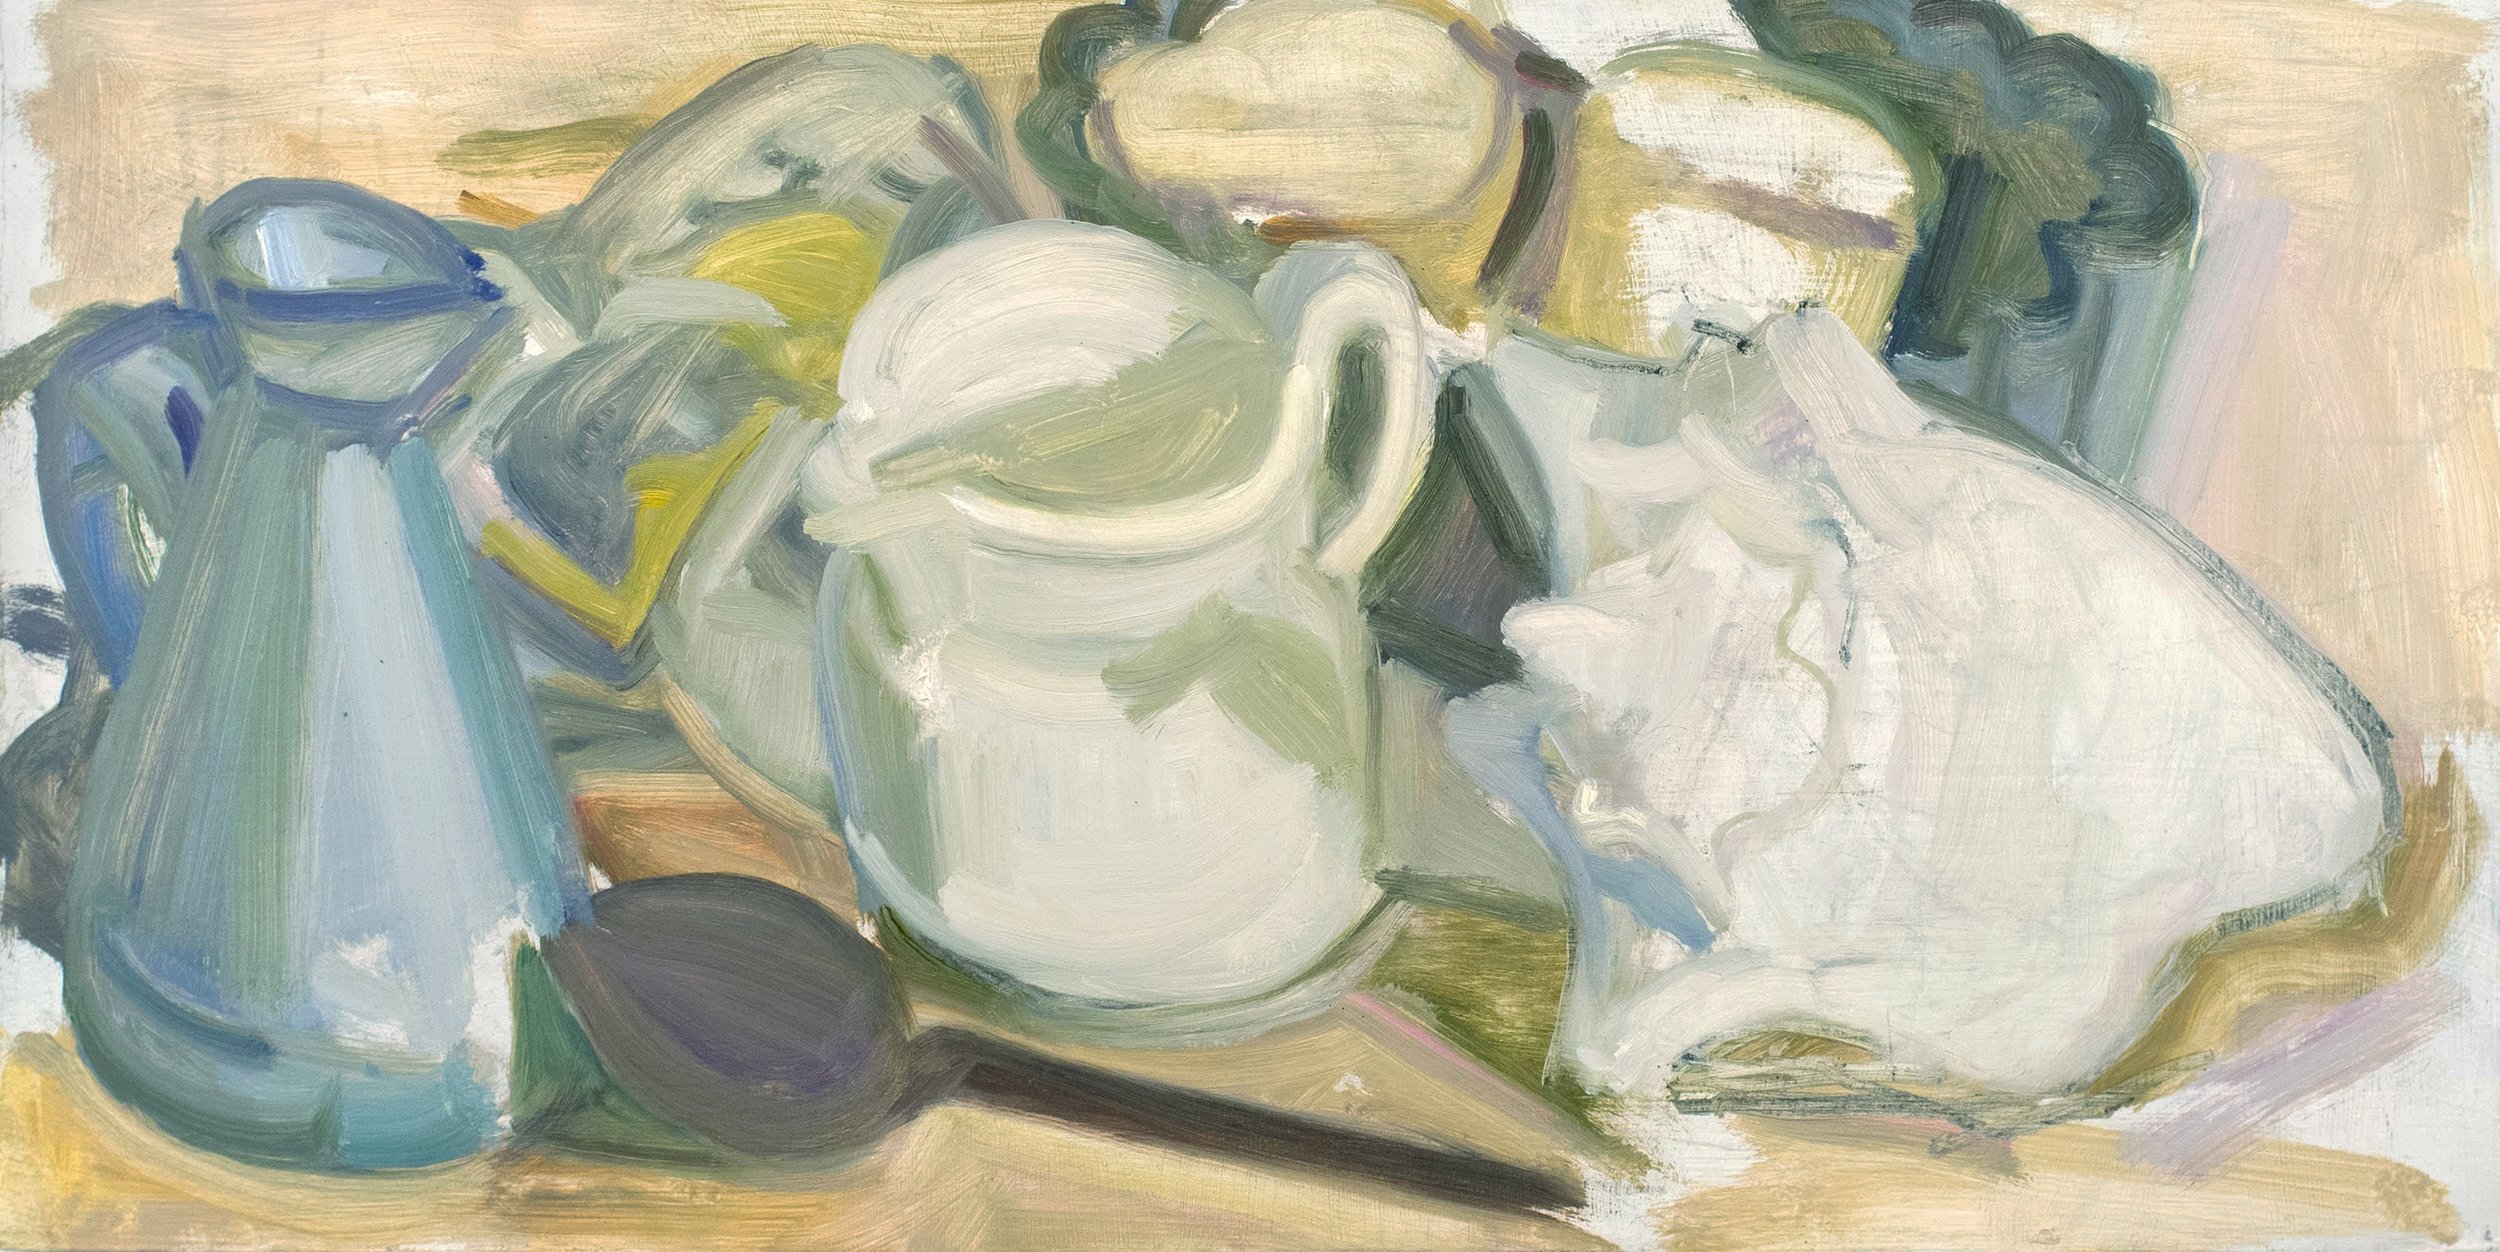   Indian Measuring Can, Creamer, Shell , 2019, oil/panel, 8 x 16 in. (Private collection) 